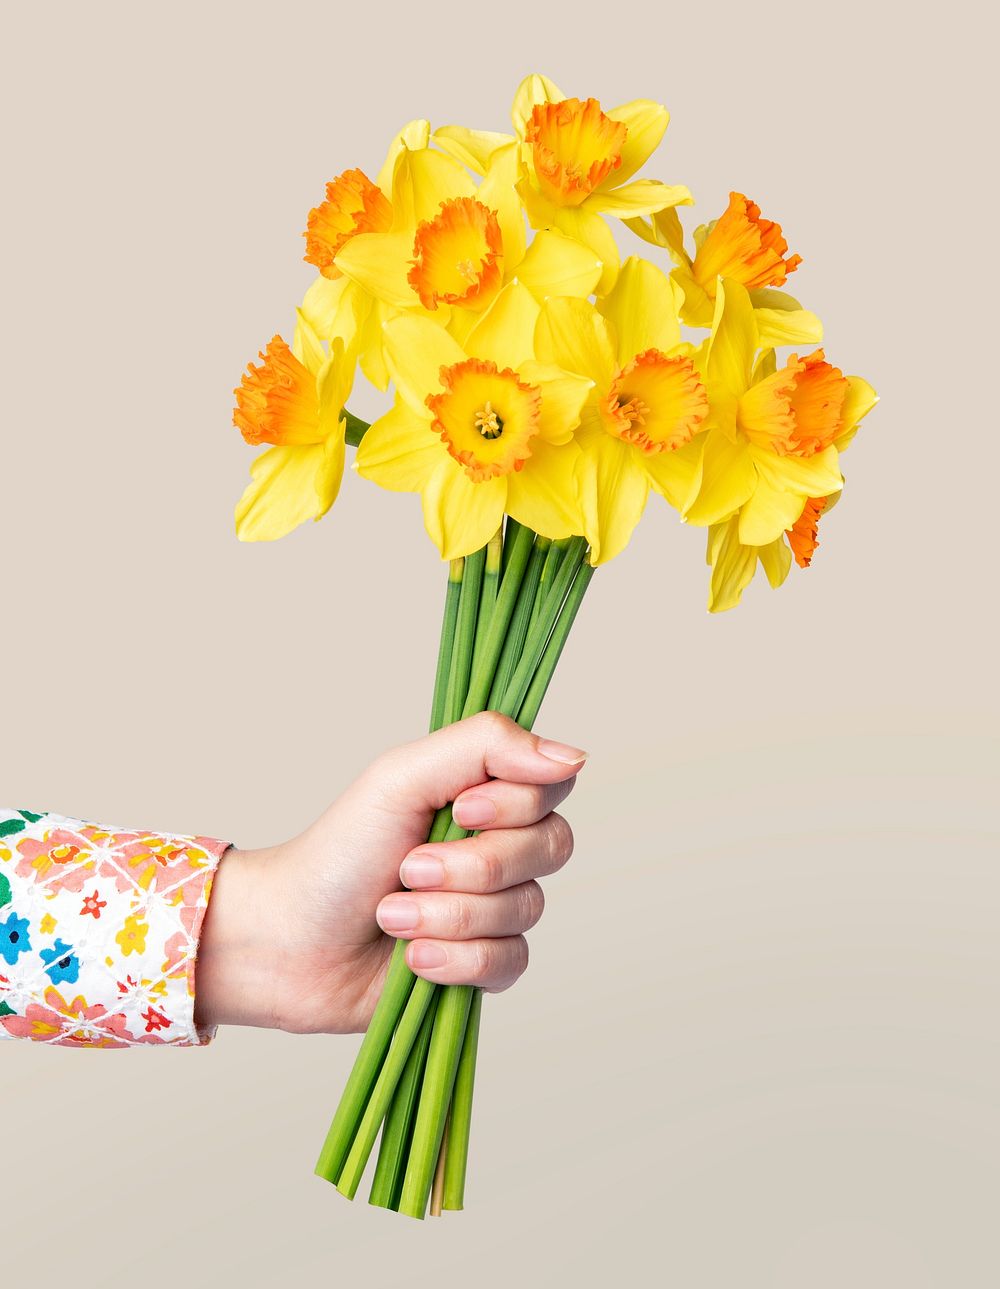 Daffodil bouquet held by hand